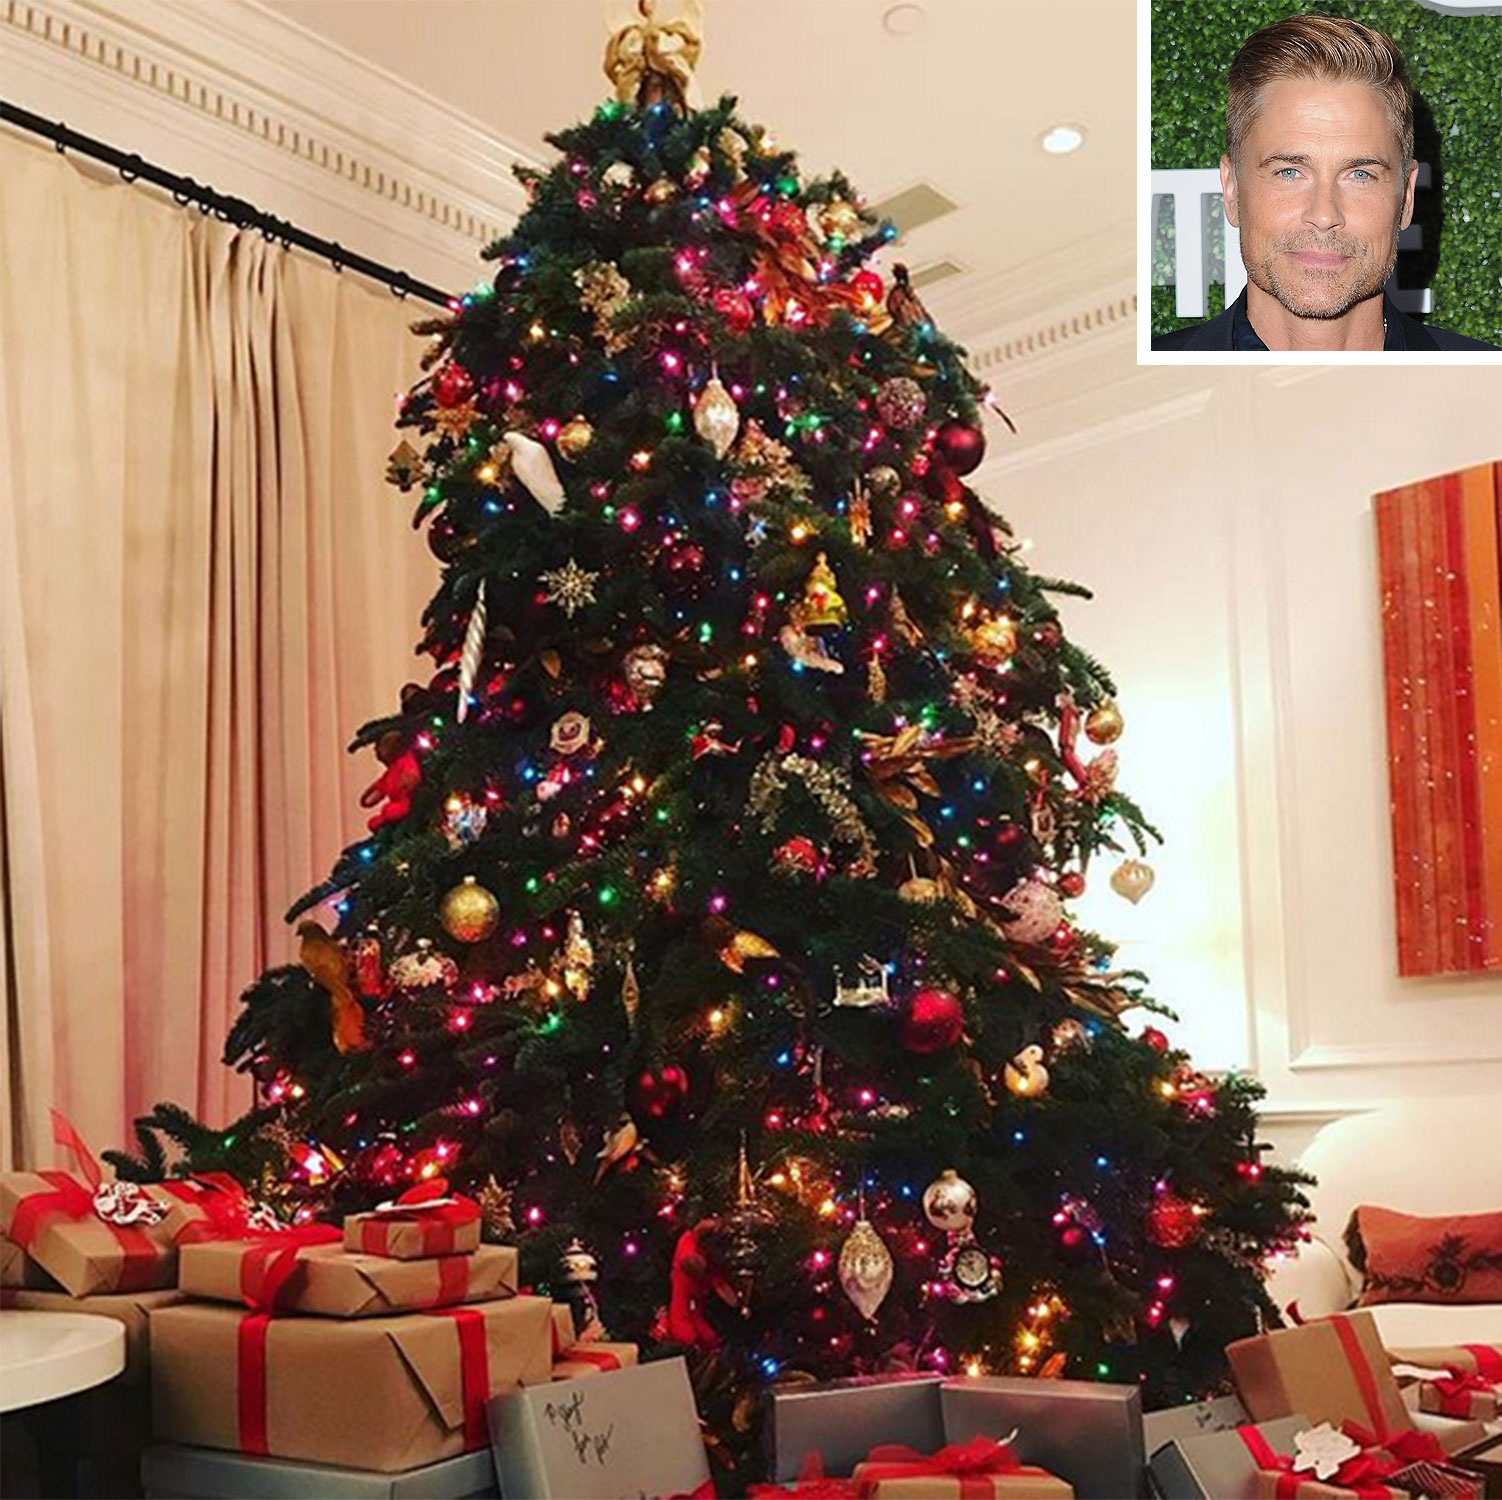 Celebrity Christmas Trees and Holiday Decorations | PEOPLE.com